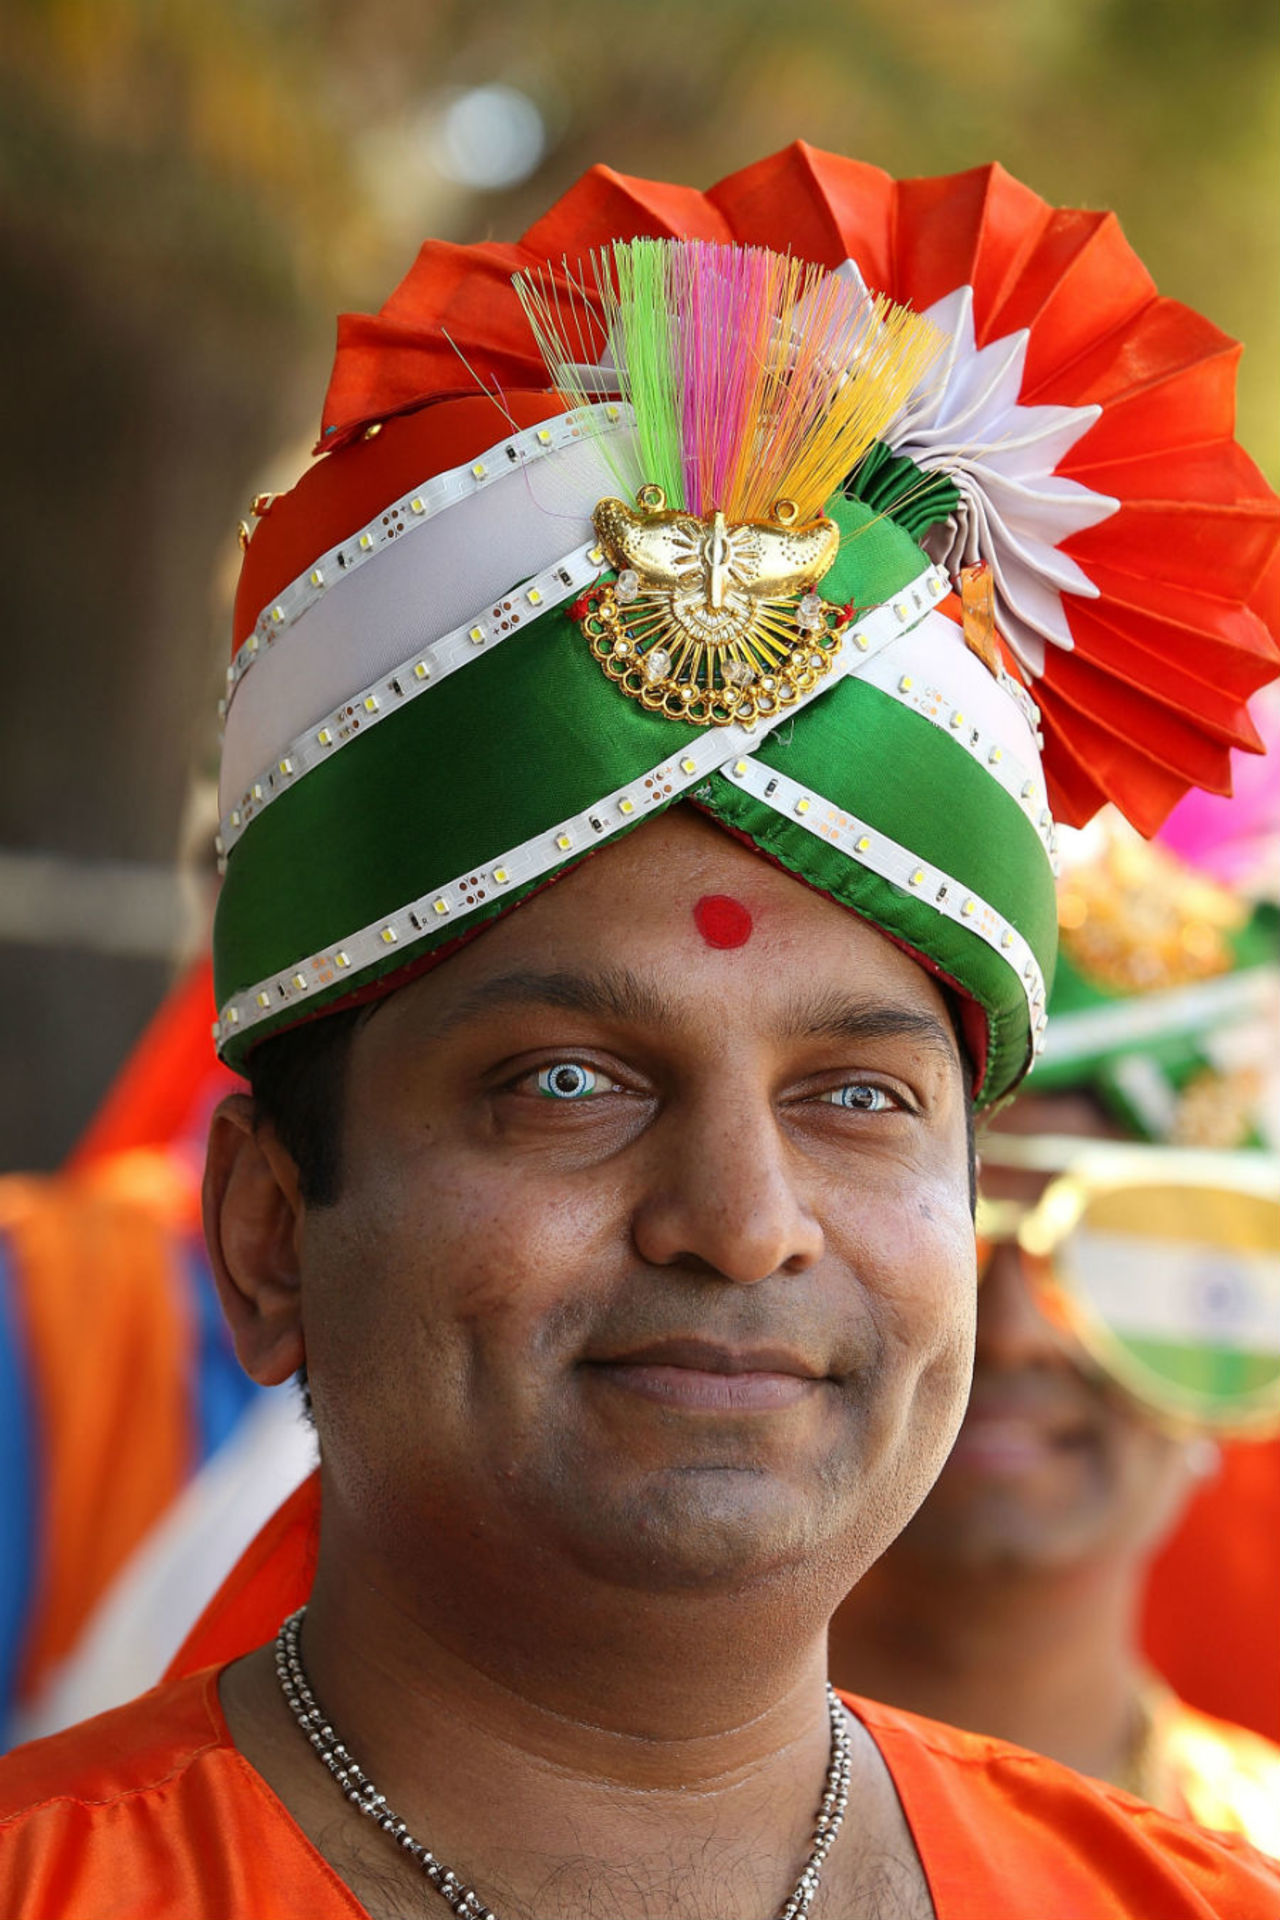 His eyes tell all: An Indian fan at the WACA, India v West Indies, World Cup 2015, Group B, Perth, March 6